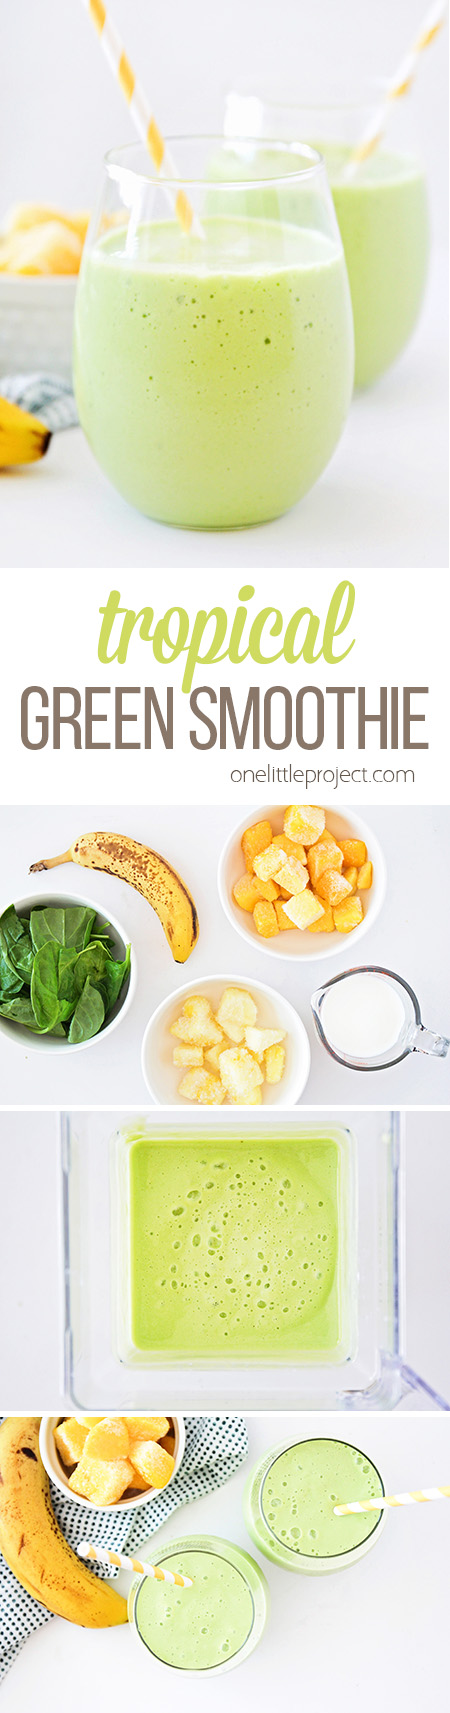 This tropical green smoothie has a delicious combination of flavors, and is so easy to make. It's the perfect healthy way to start the day!